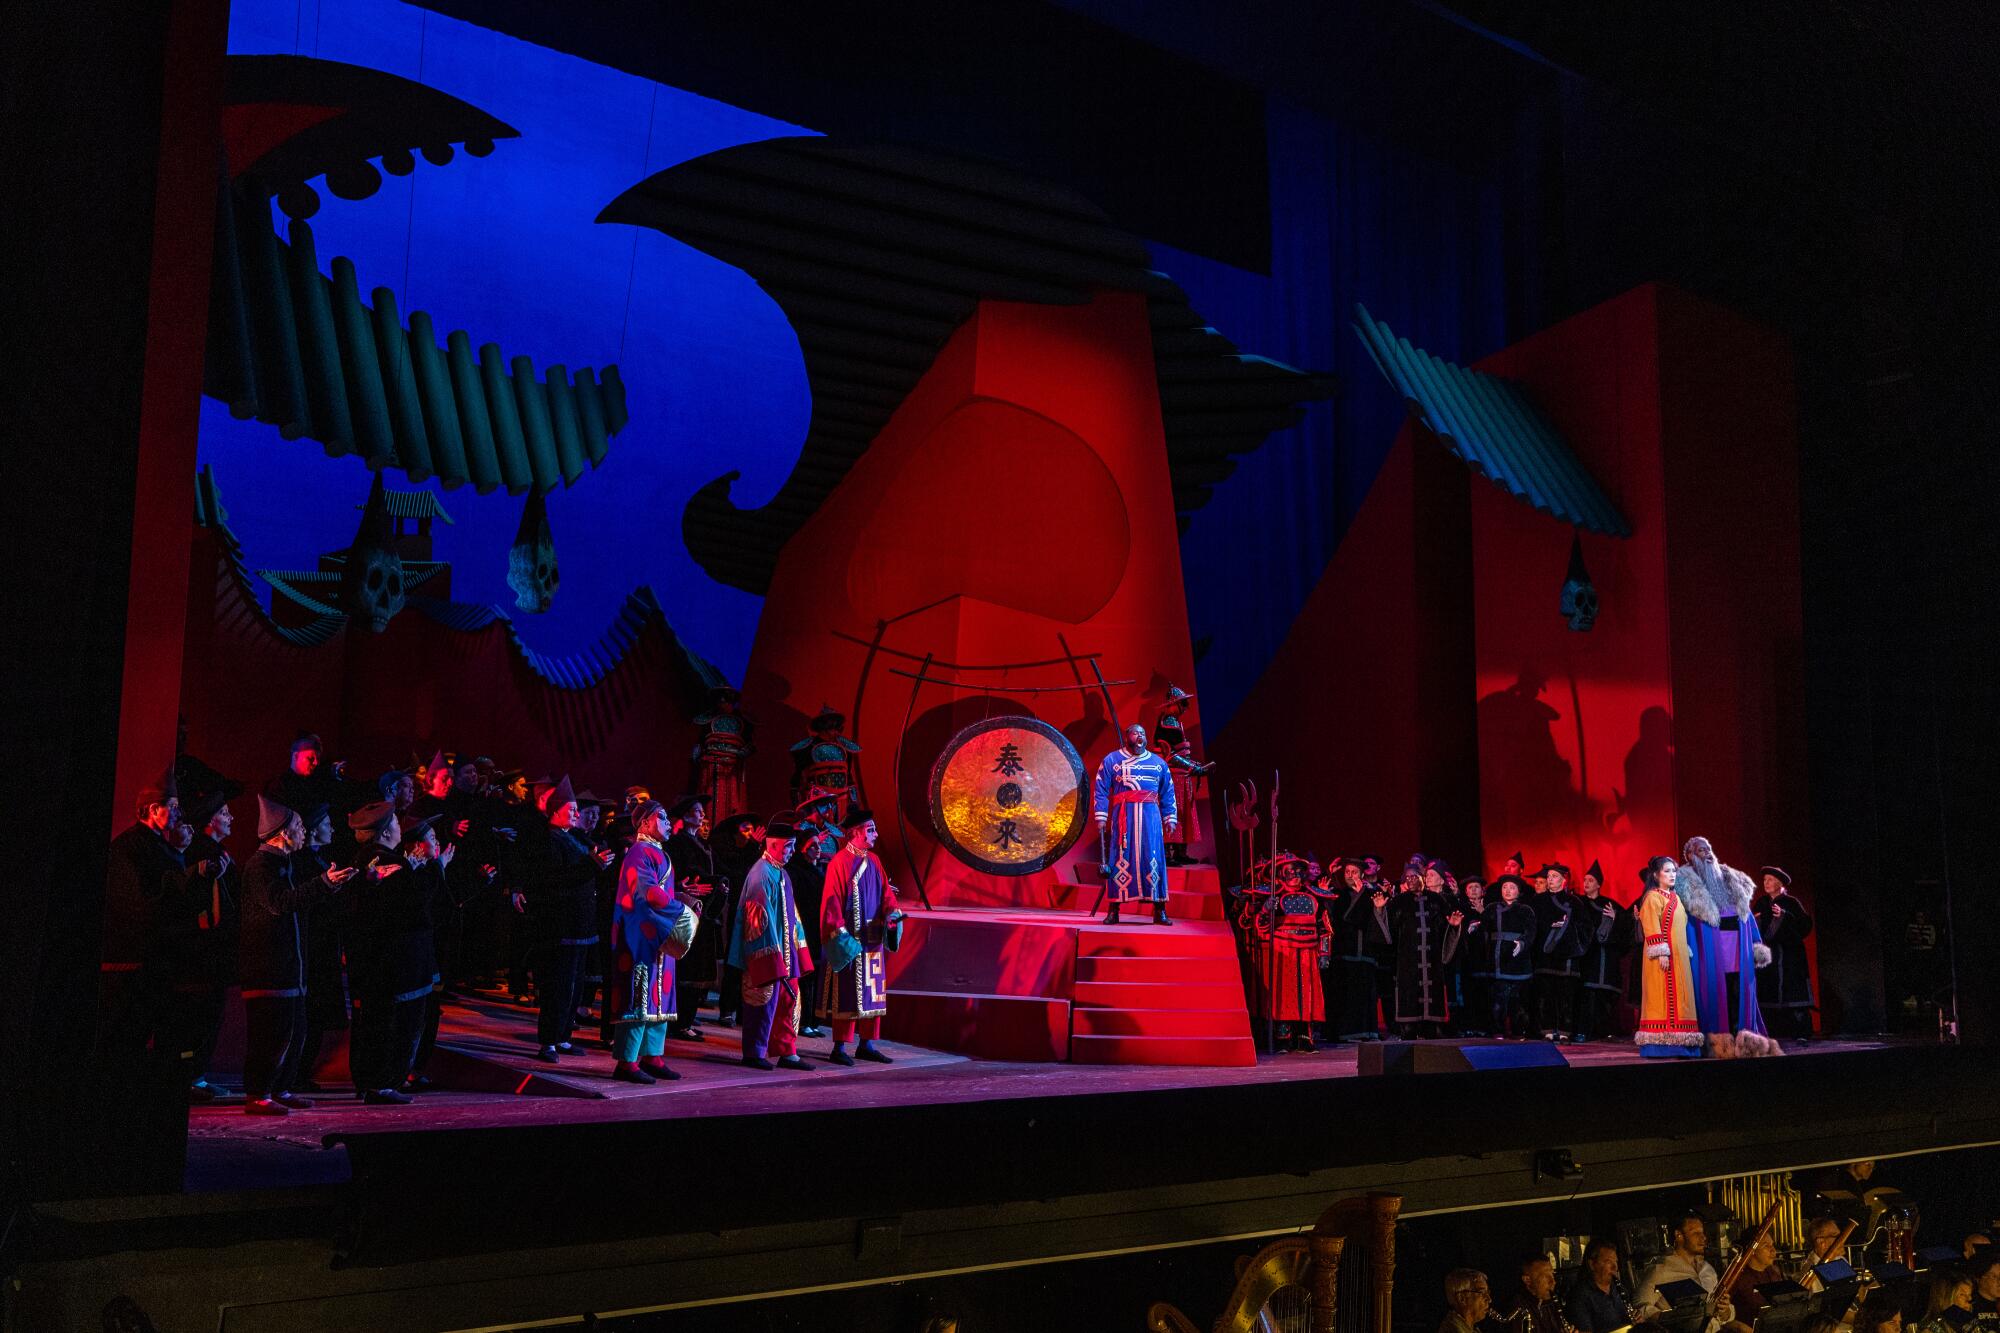 The cast of "Turandot" runs through final rehearsals of the David Hockney production of "Turandot" in L.A.